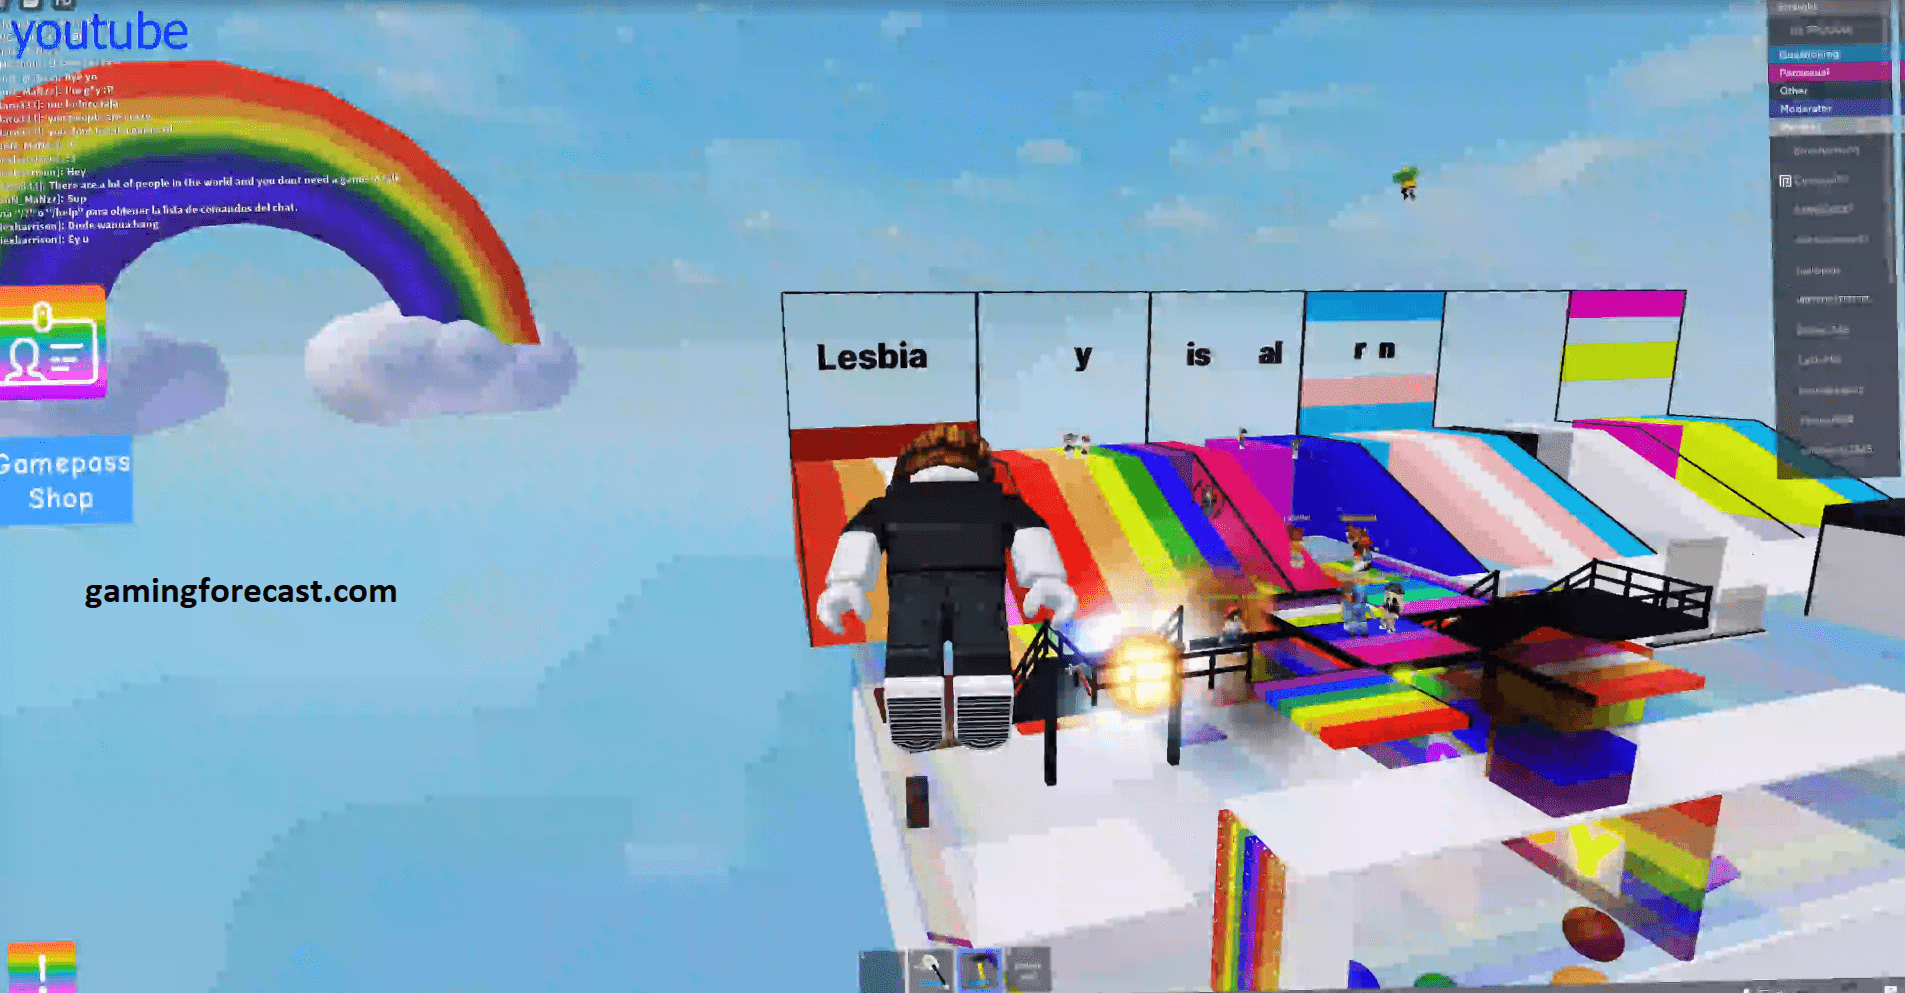 Roblox Hack Download Pc Destroy Lobby Fly Aimbot Scripts 2021 Gaming Forecast Download Free Online Game Hacks - jailbreak roblox glitch download